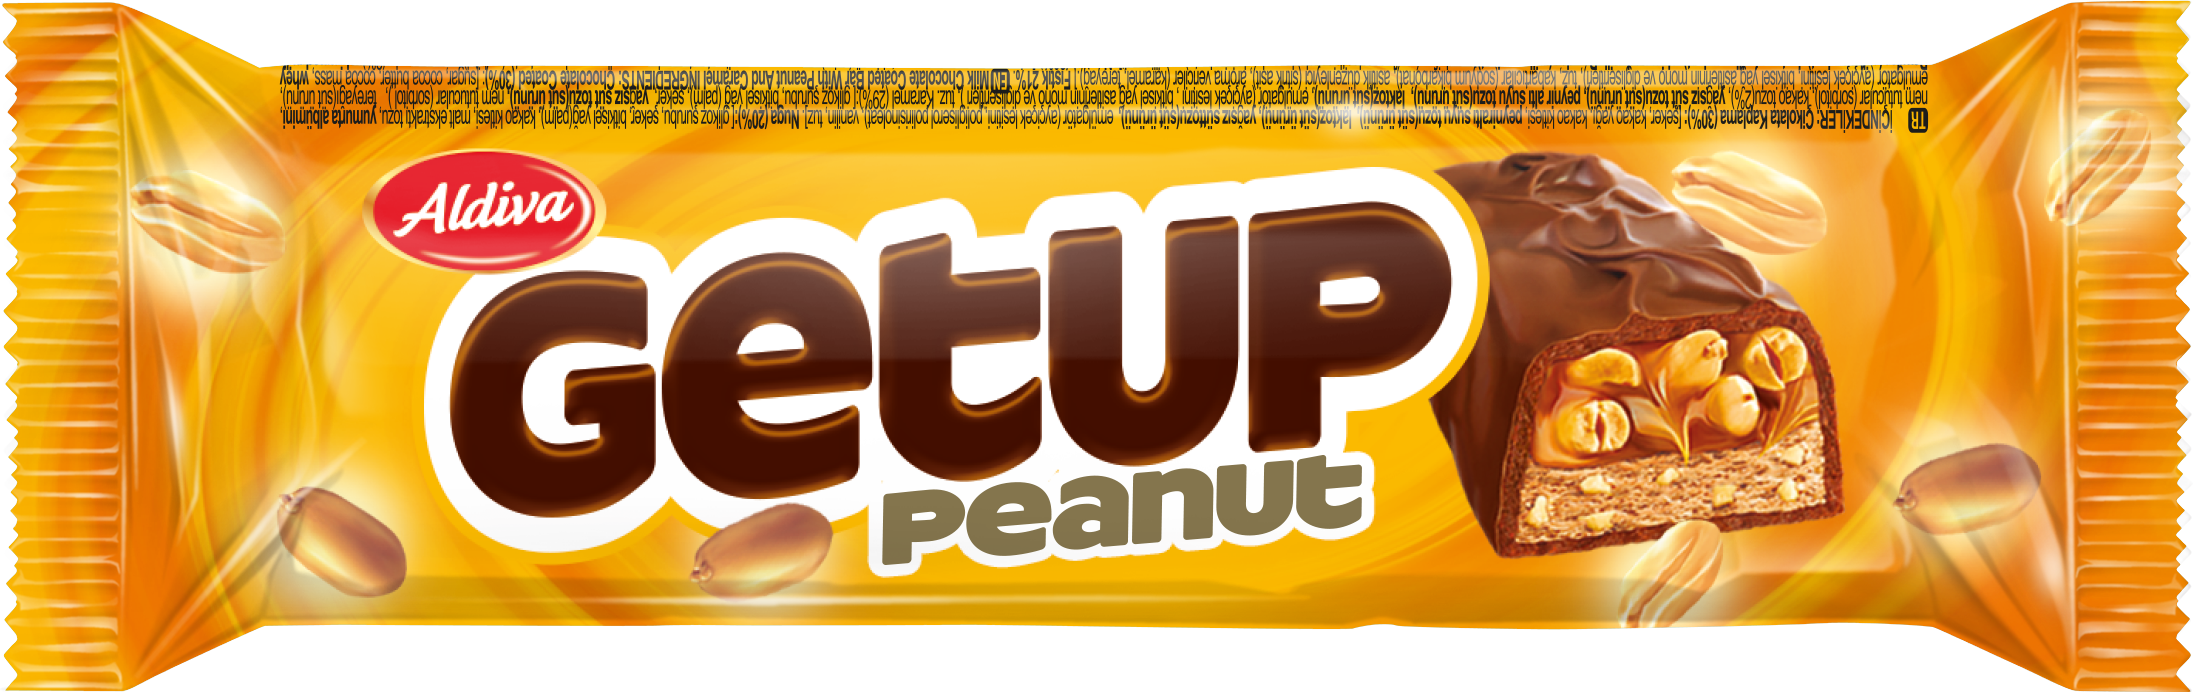 Get UP Cocoa Coated Peanut and Caramel Covered Bar